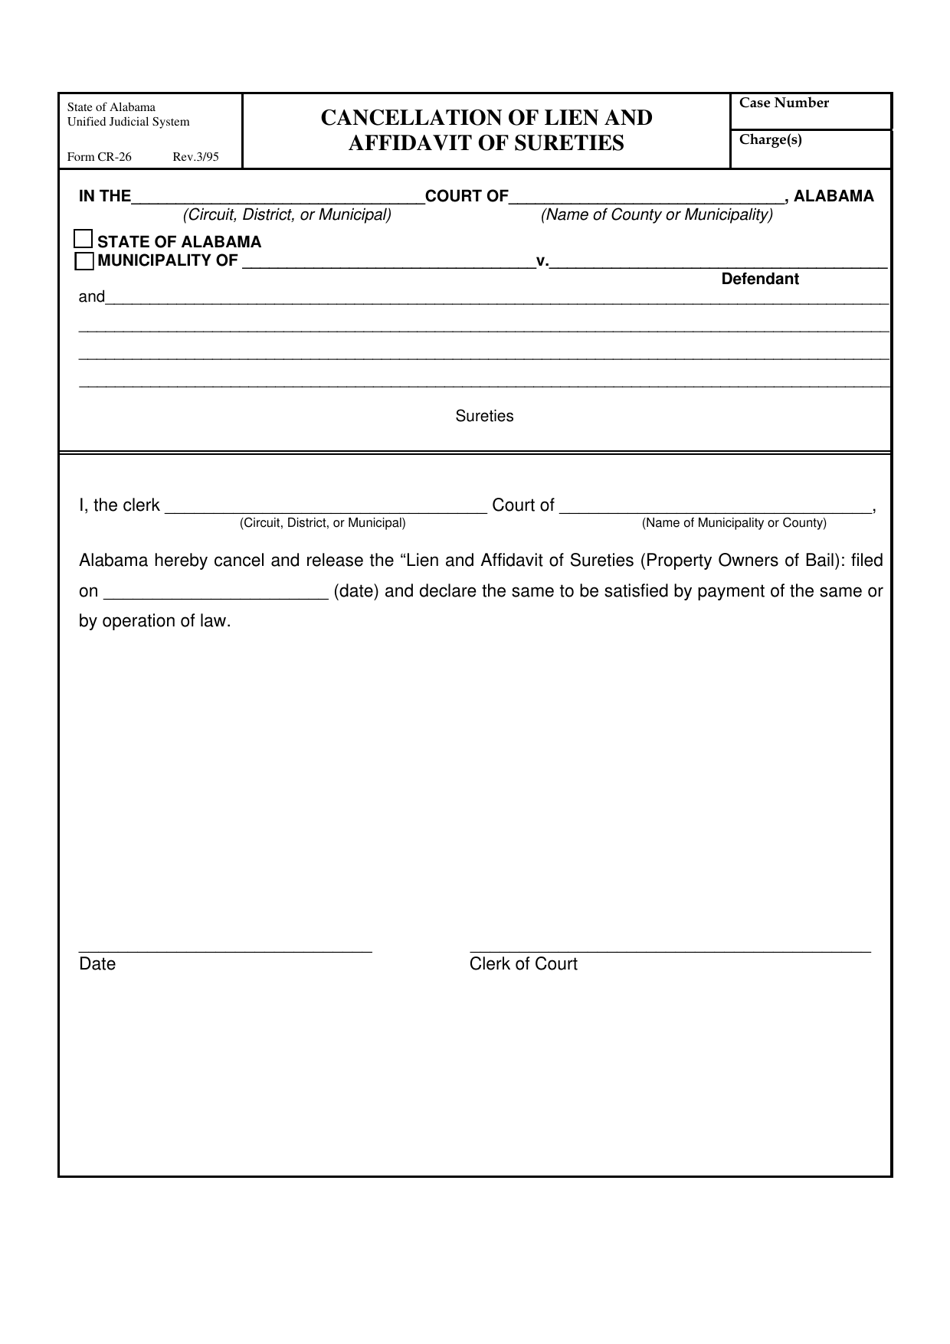 Form CR-26 Cancellation of Lien and Affidavit of Sureties - Alabama, Page 1